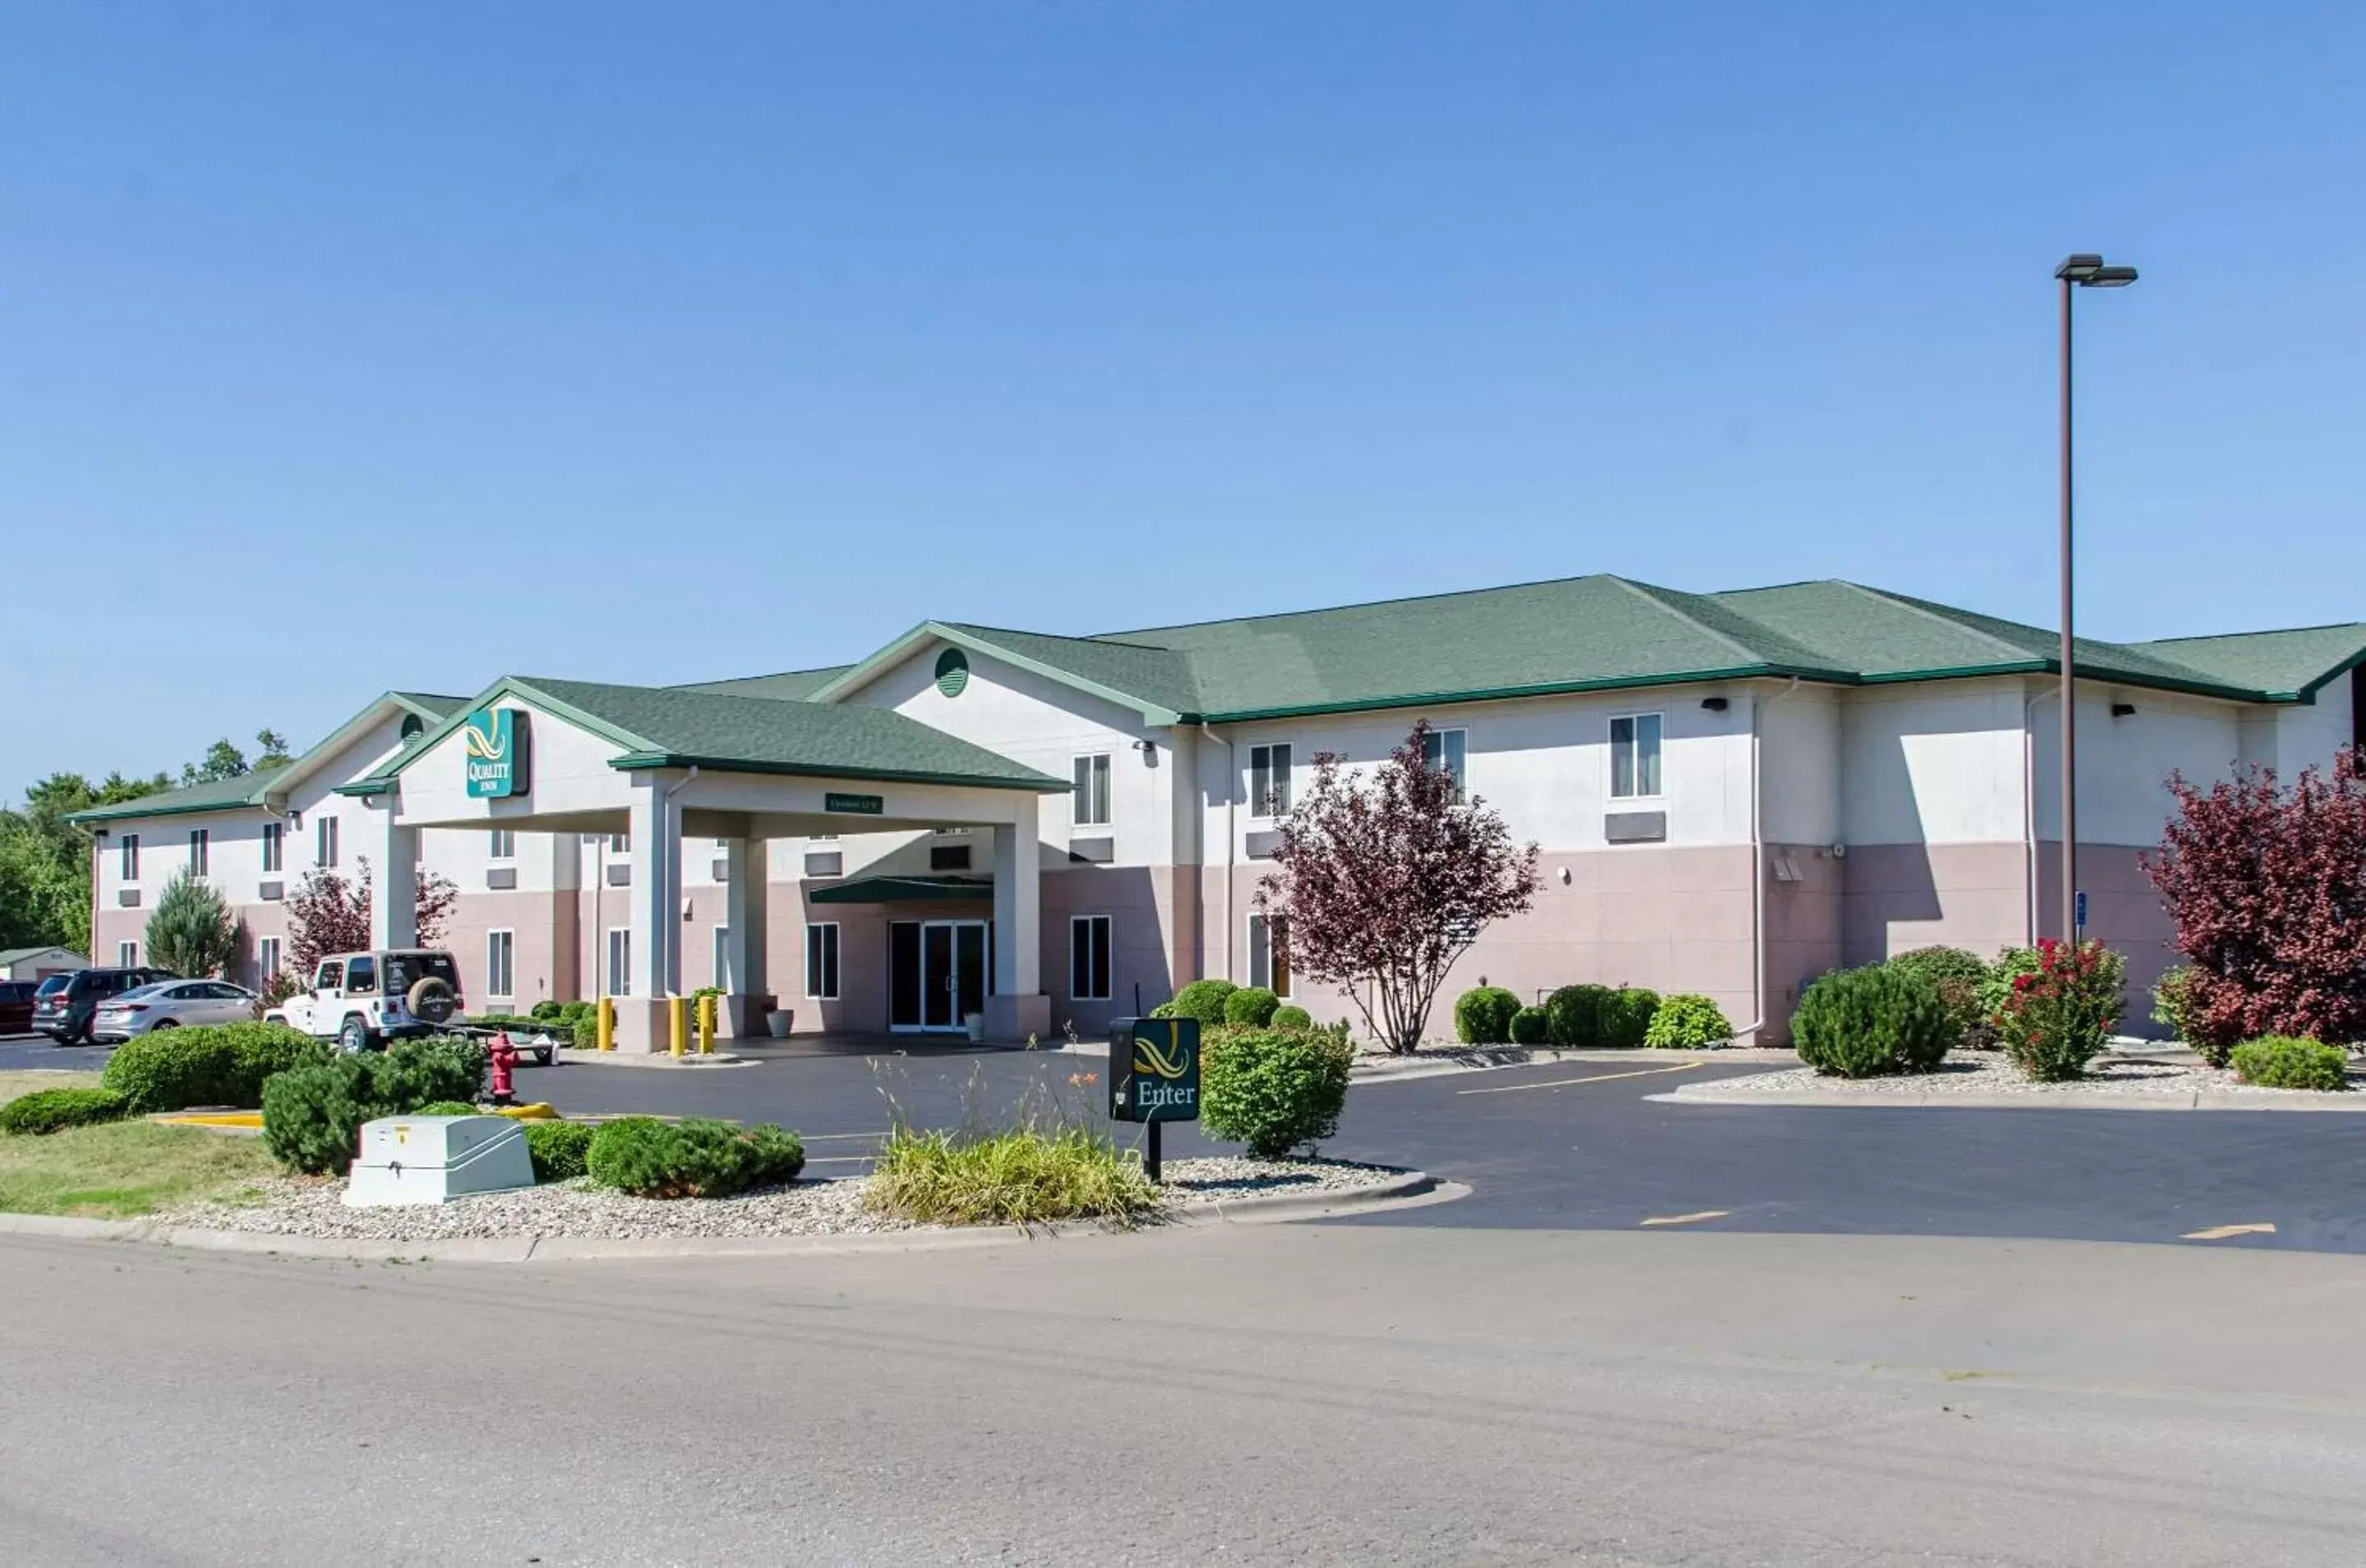 Property Building in Quality Inn Junction City near Fort Riley